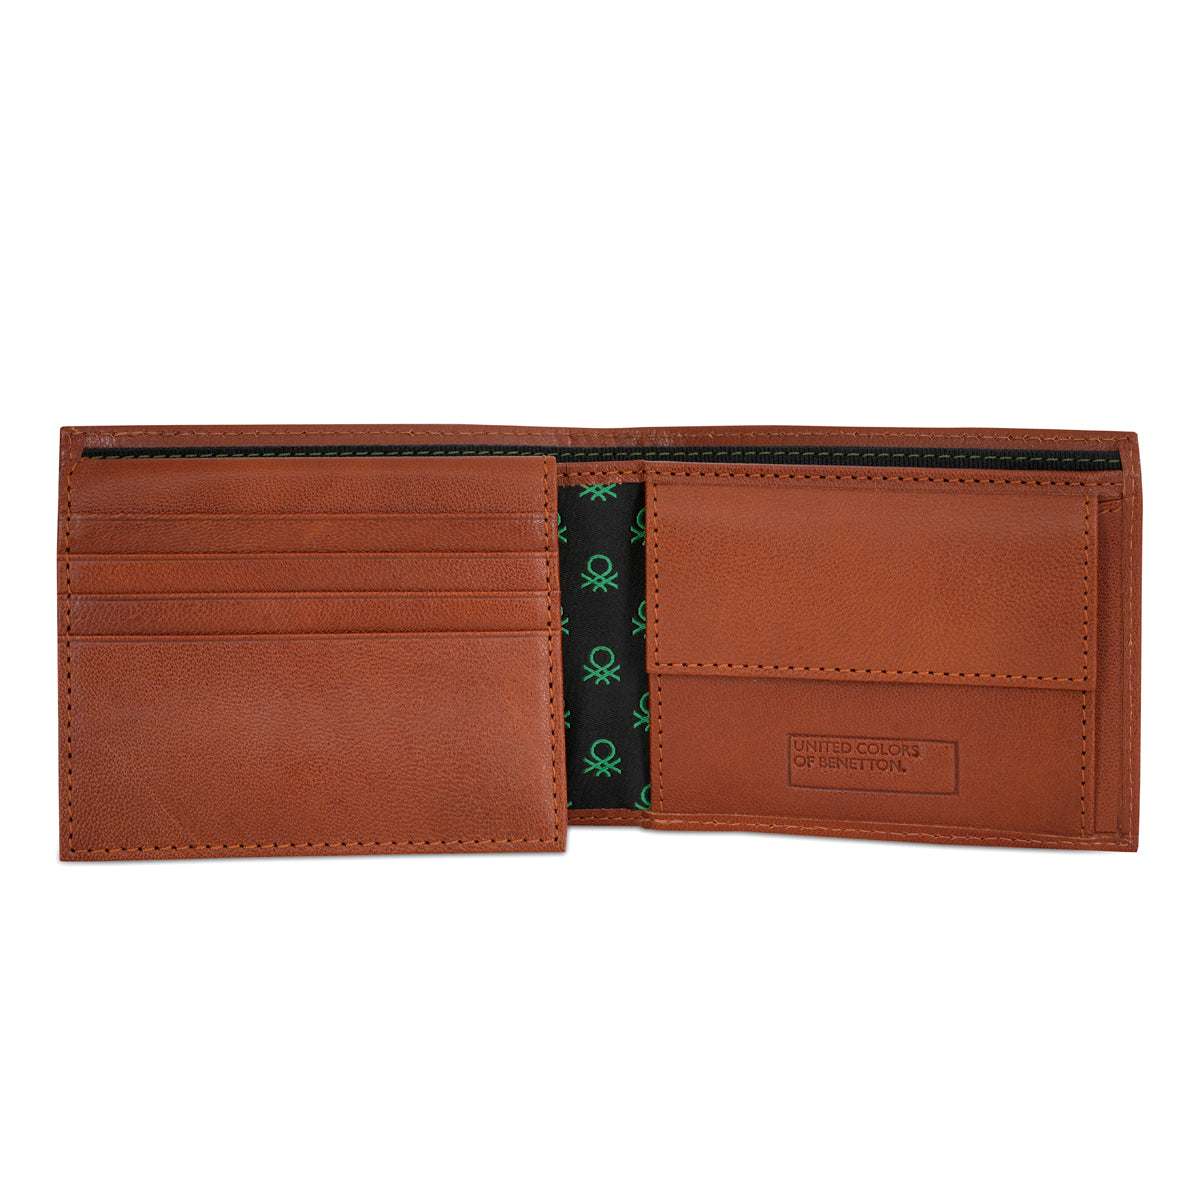 United Colors of Benetton Benito Multicard Coin Wallet Tan